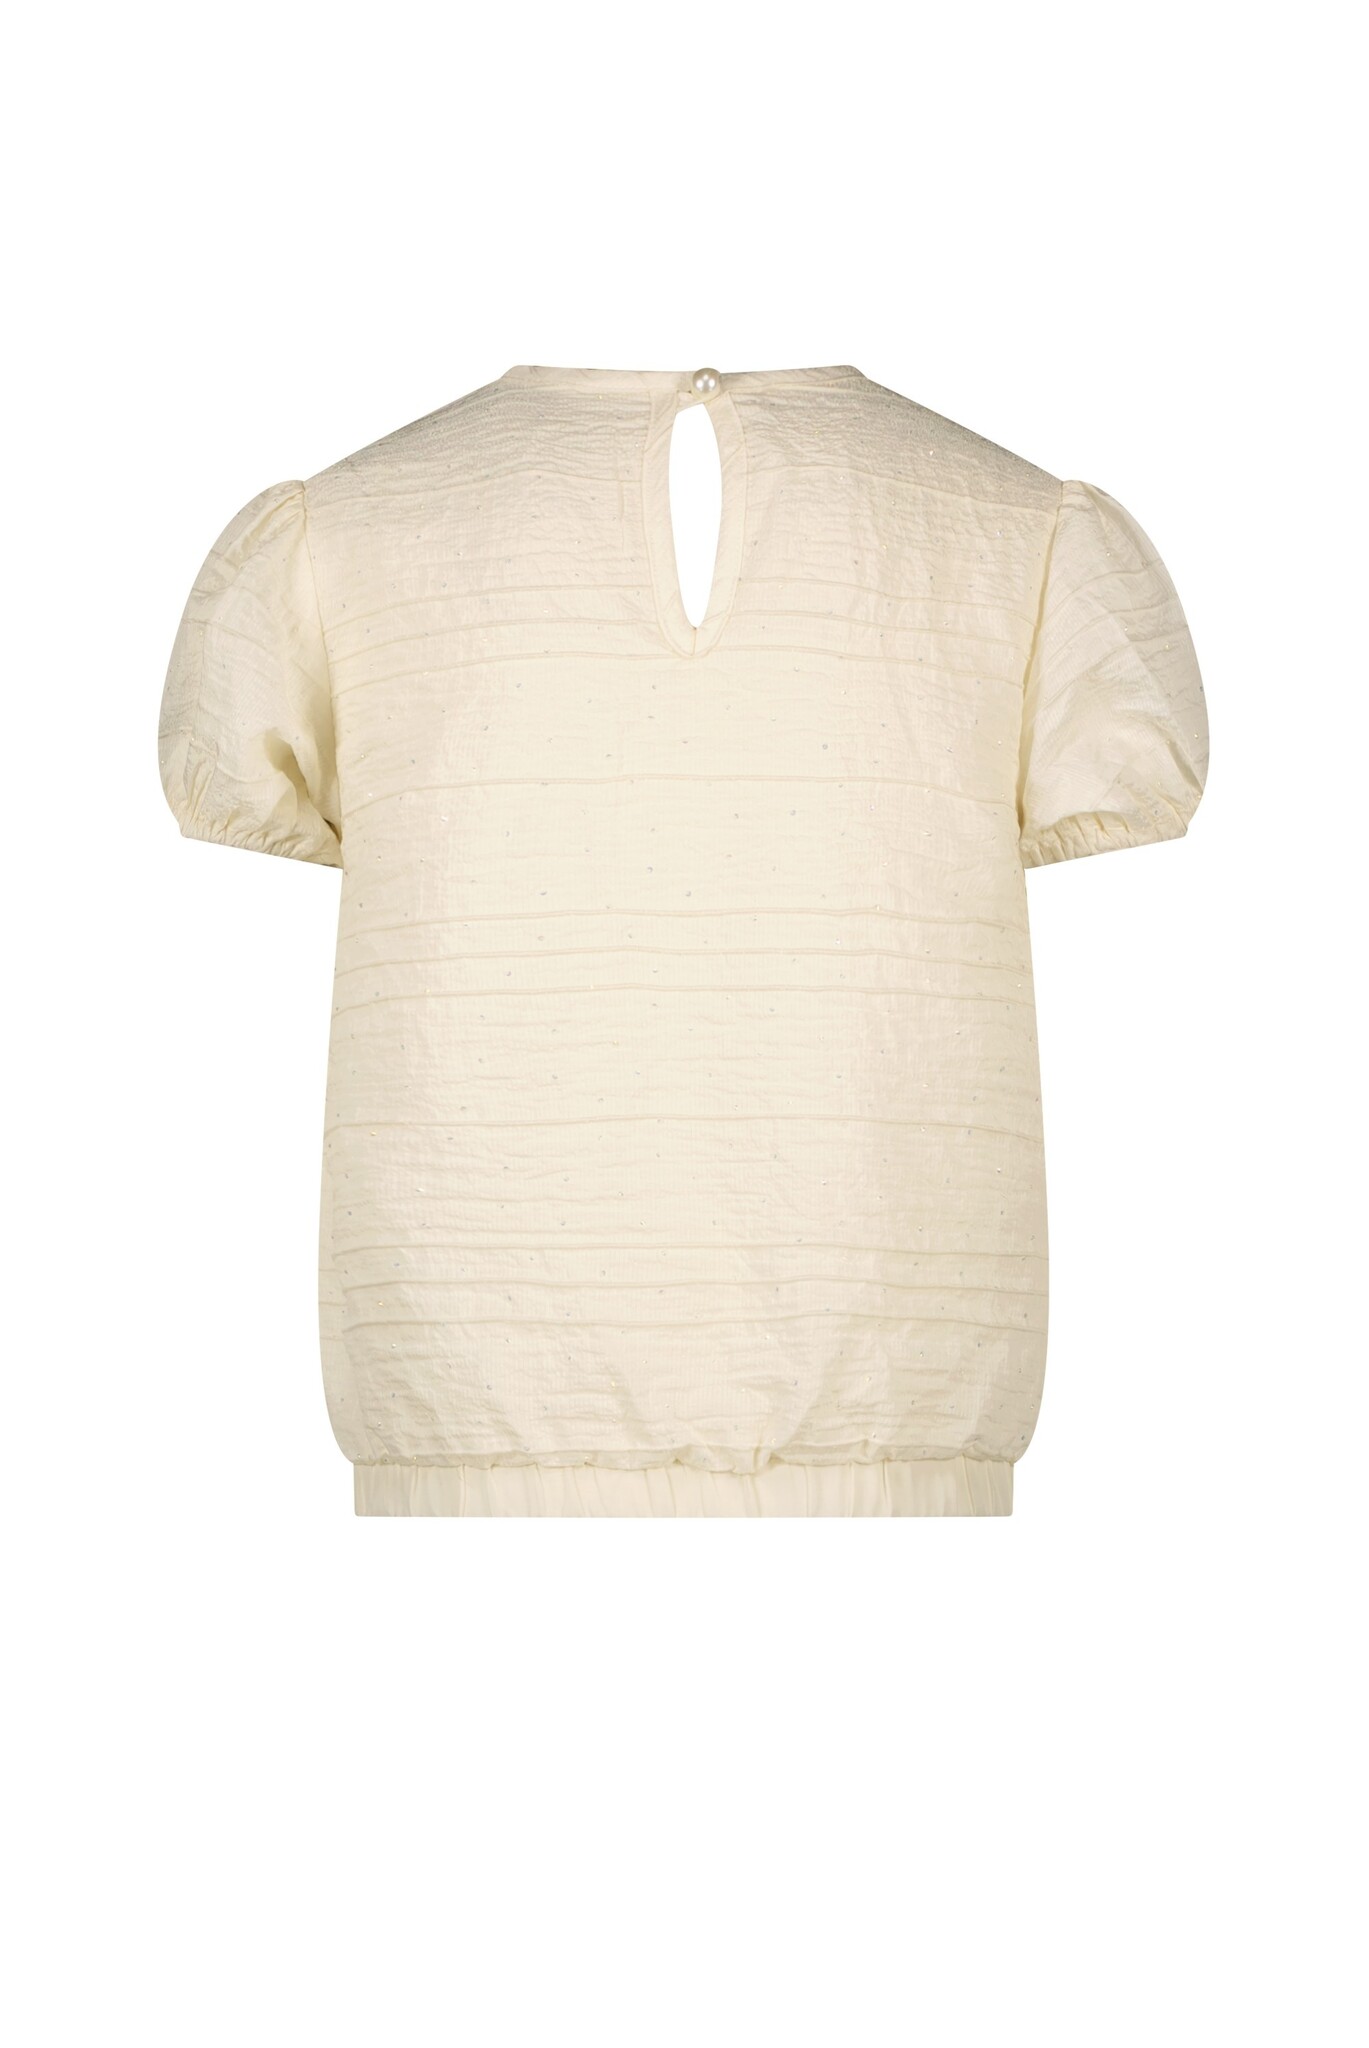 Everly Blouse - Off White